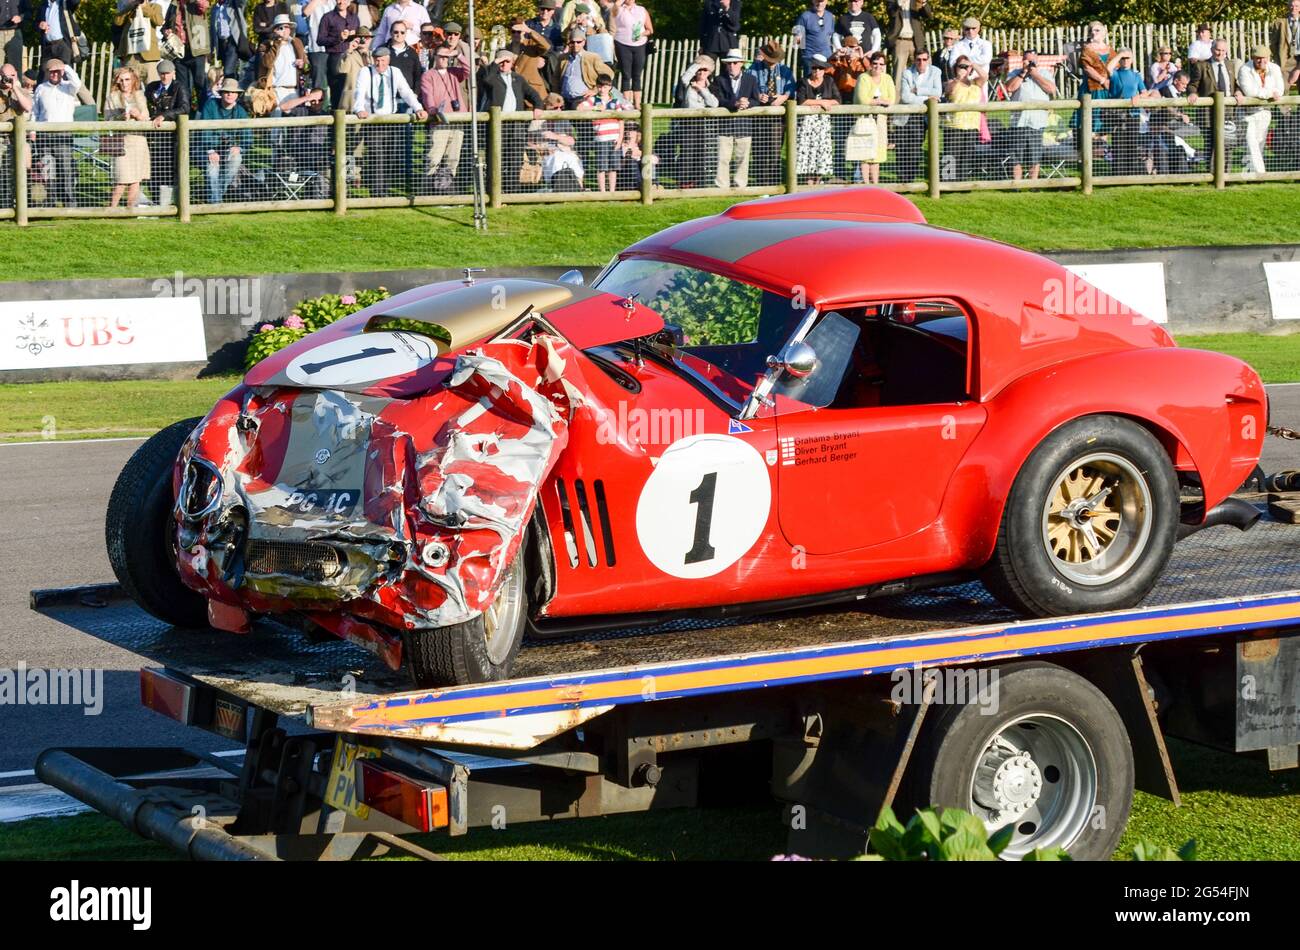 Shelby AC Cobra classic racing car being transported away following crashing during racing at the Goodwood Revival 2011, UK. Smashed front Stock Photo